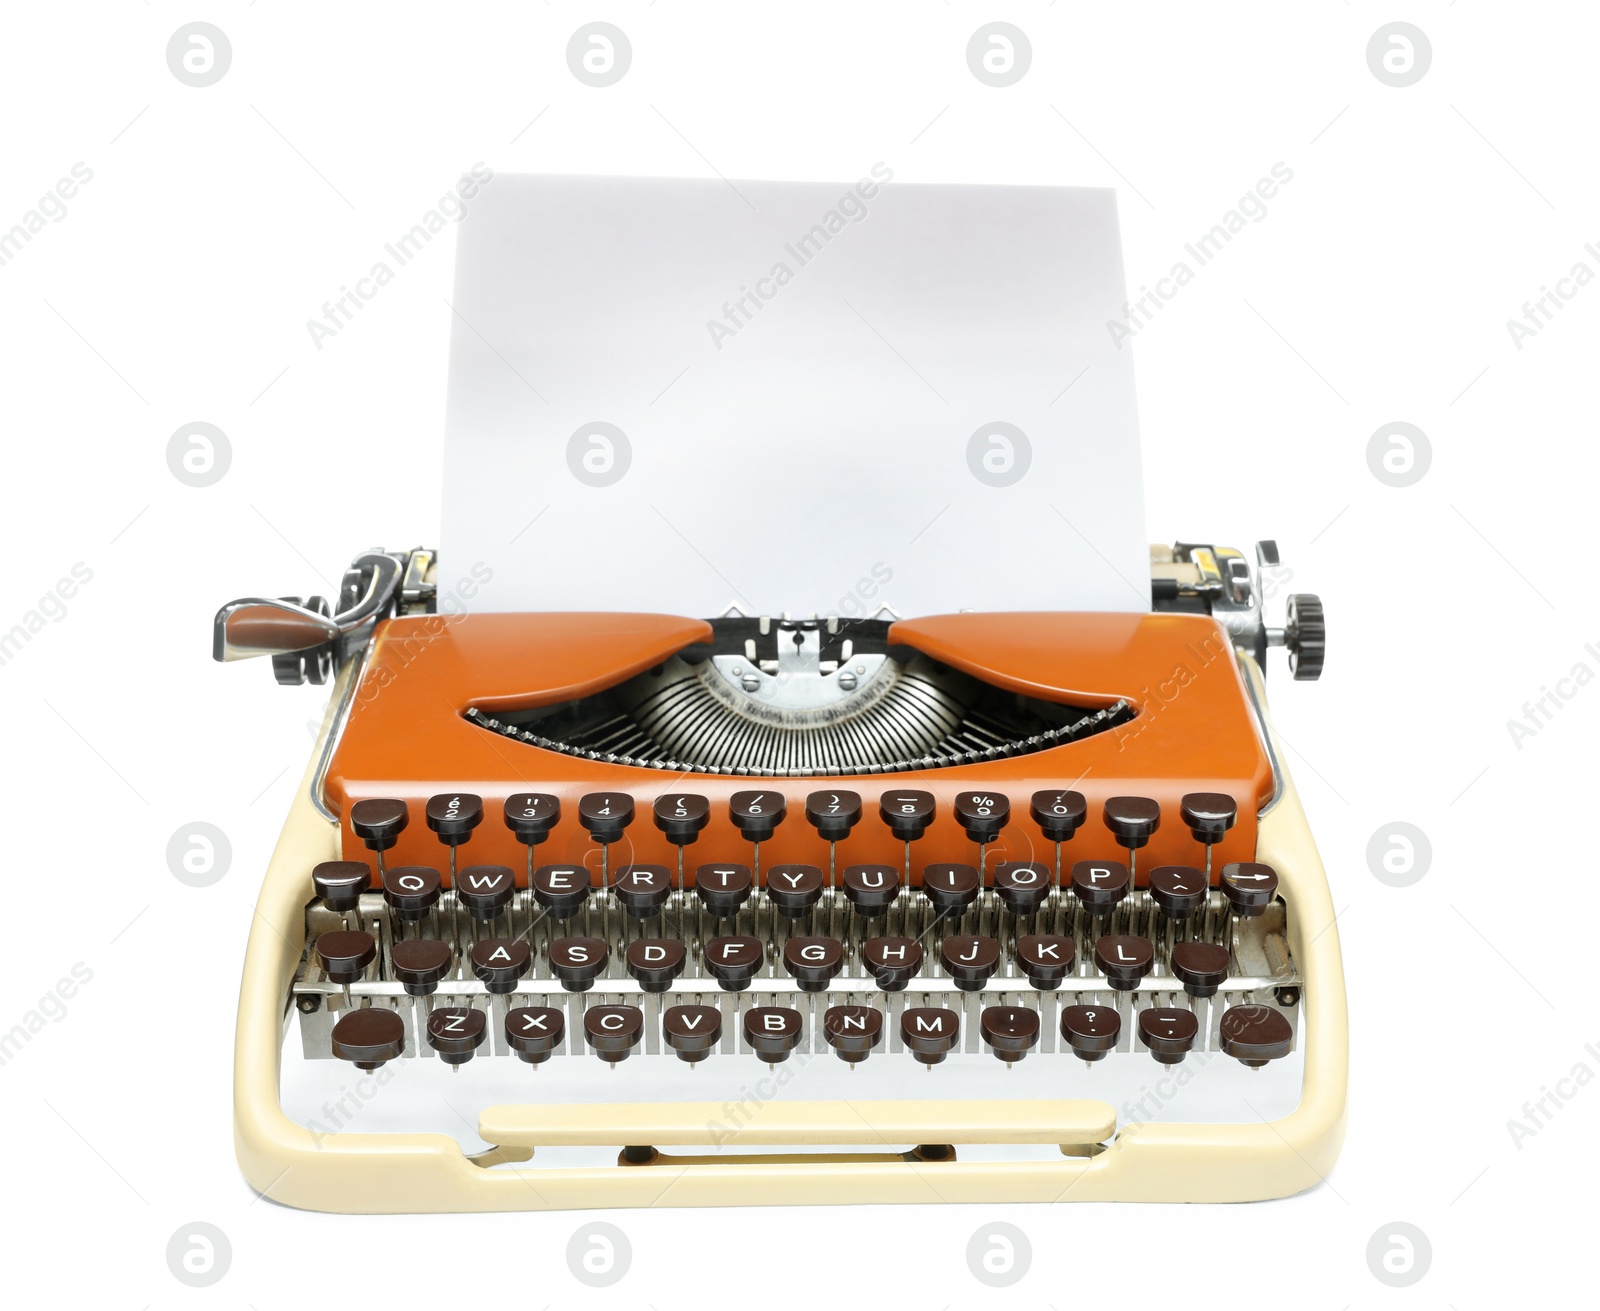 Image of Vintage typewriter with sheet of paper isolated on white